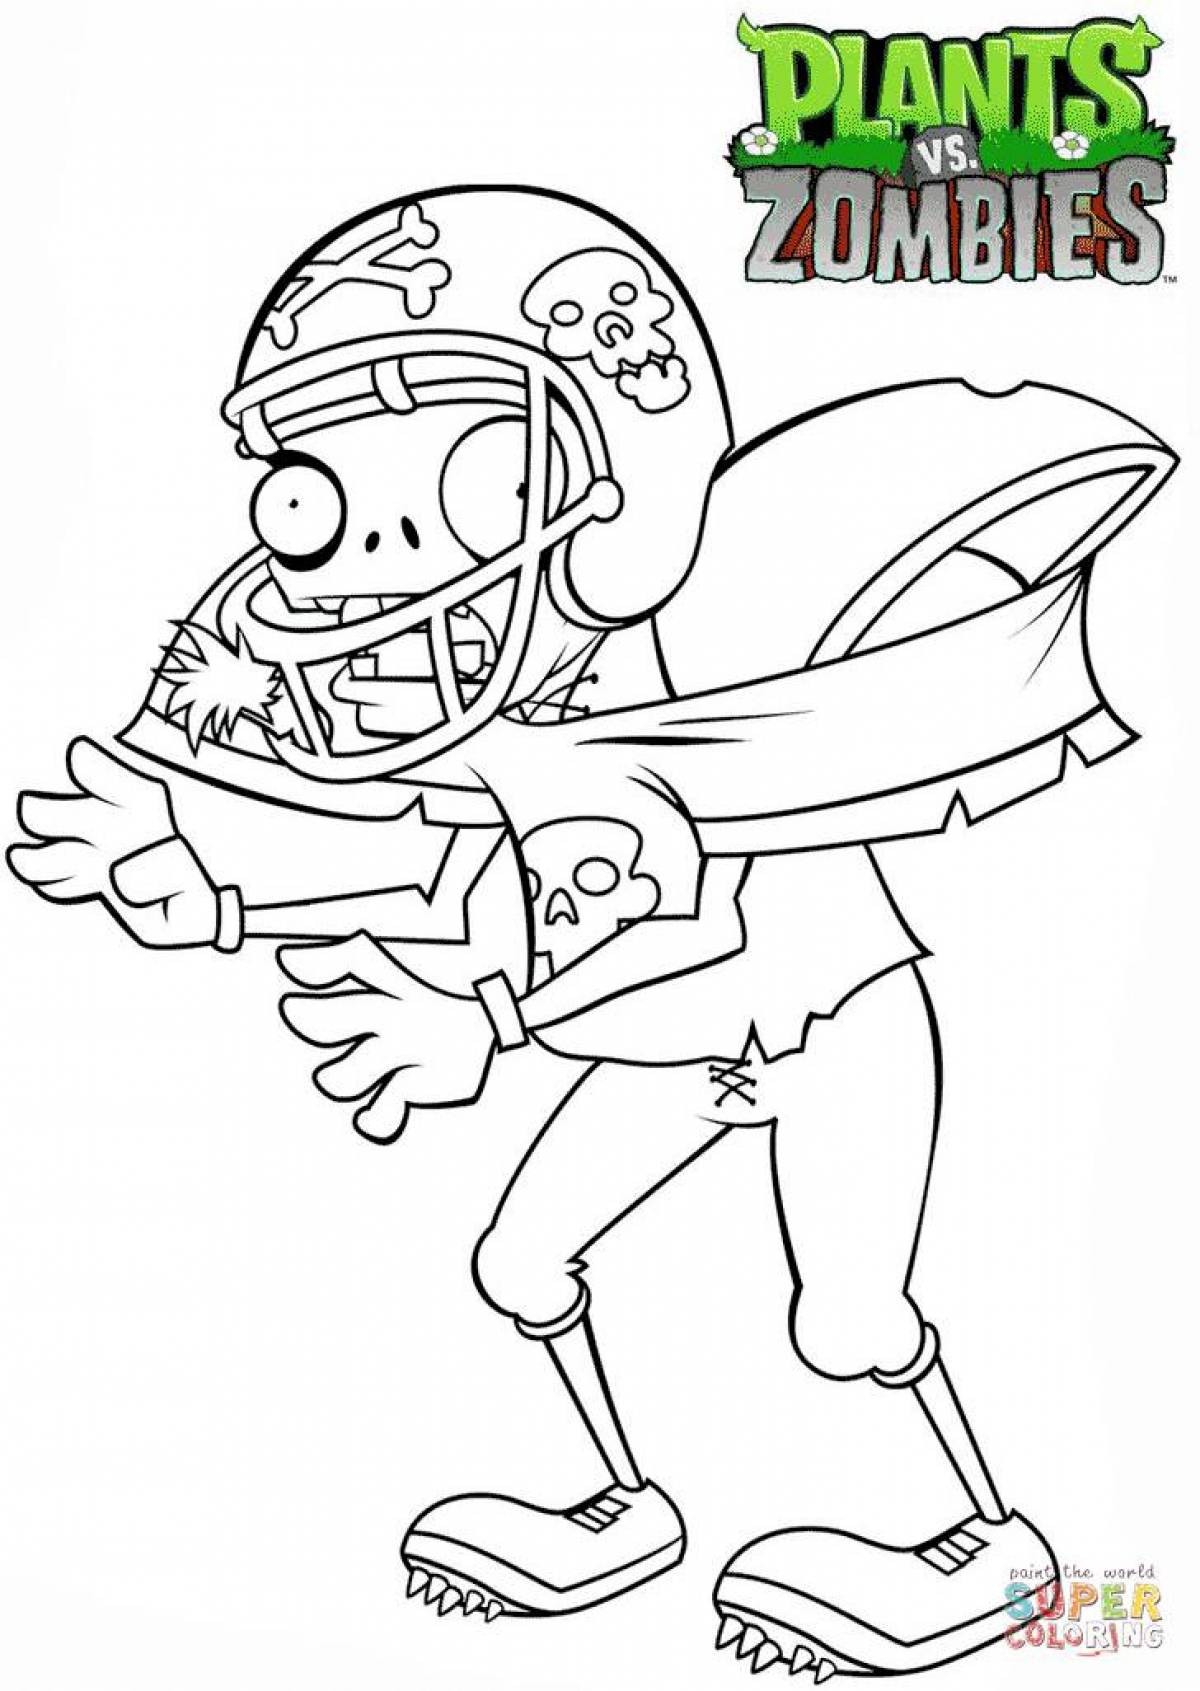 Playful plants vs zombies coloring page